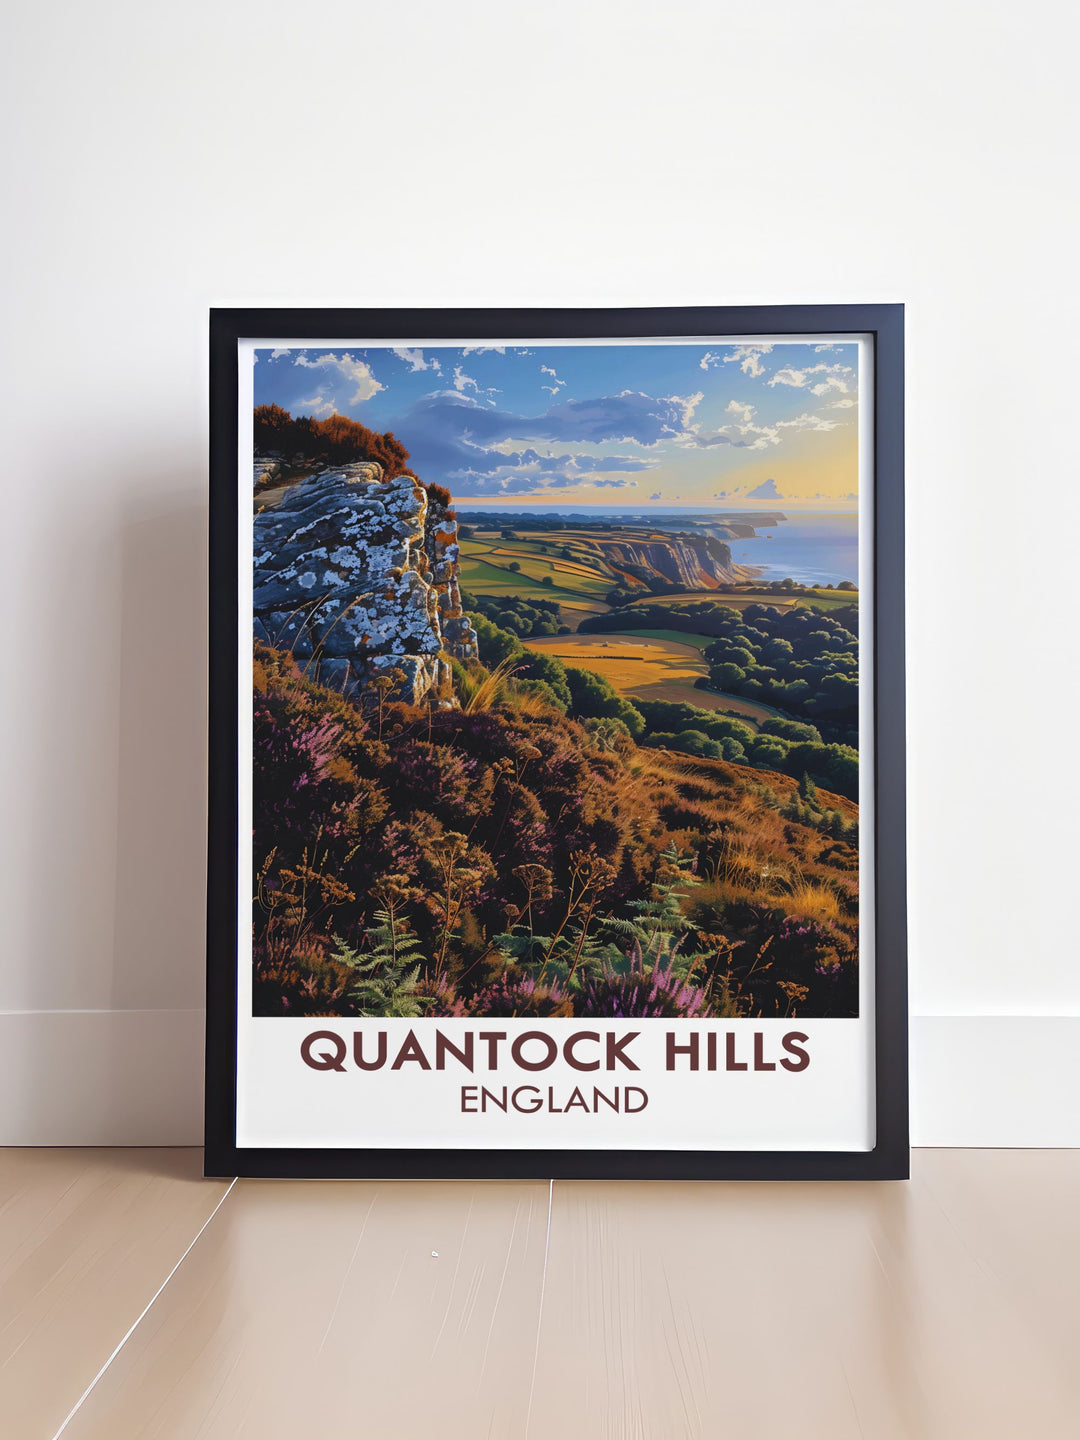 Will's Neck travel poster print highlighting the serene beauty of Quantock Hills AONB and Somerset AONB a perfect choice for those who love Somerset Travel Art and want to showcase the picturesque scenery of Vale Taunton Deane and Quantock Heath.